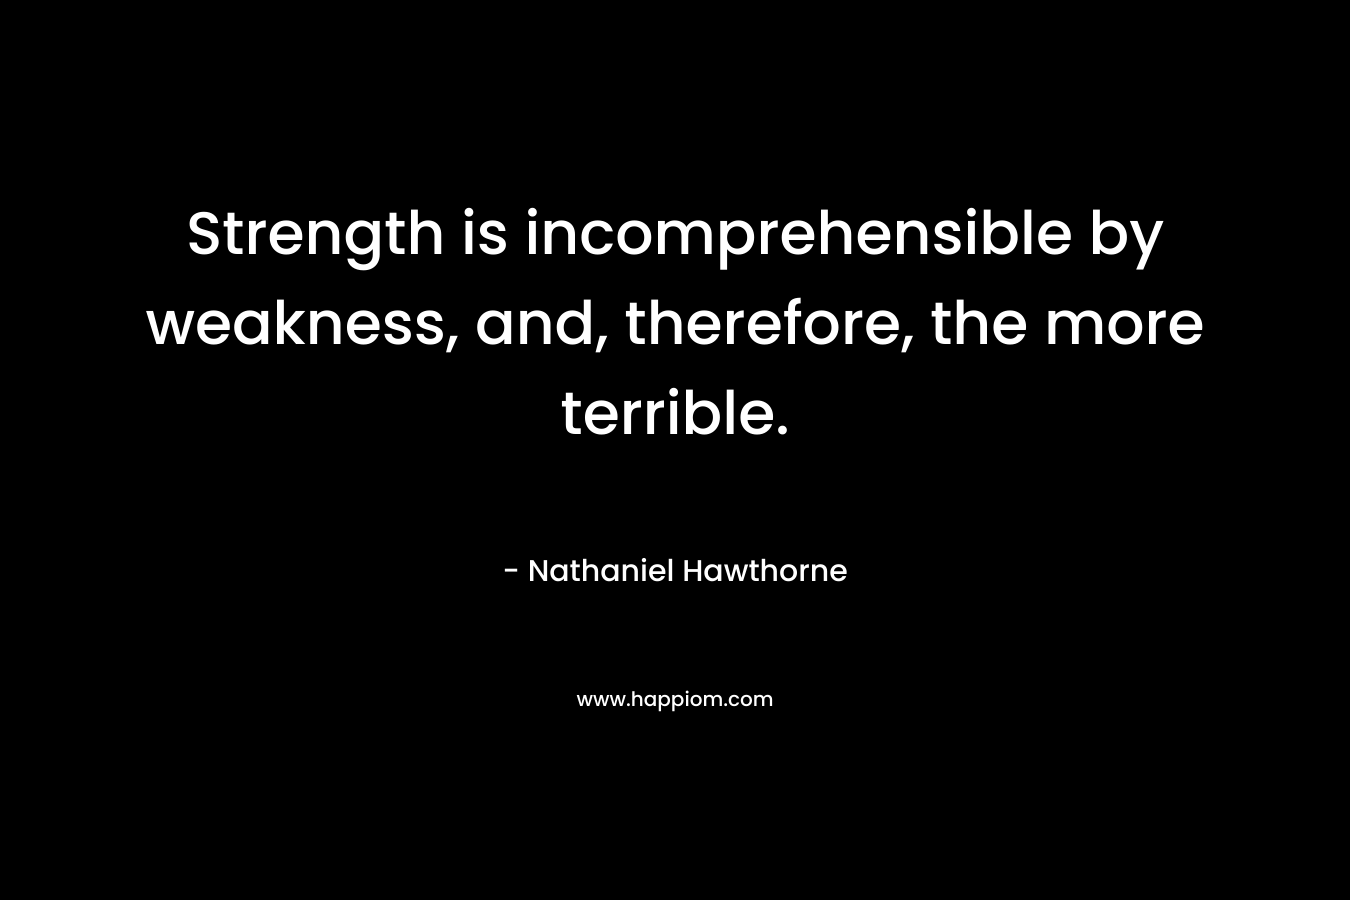 Strength is incomprehensible by weakness, and, therefore, the more terrible.